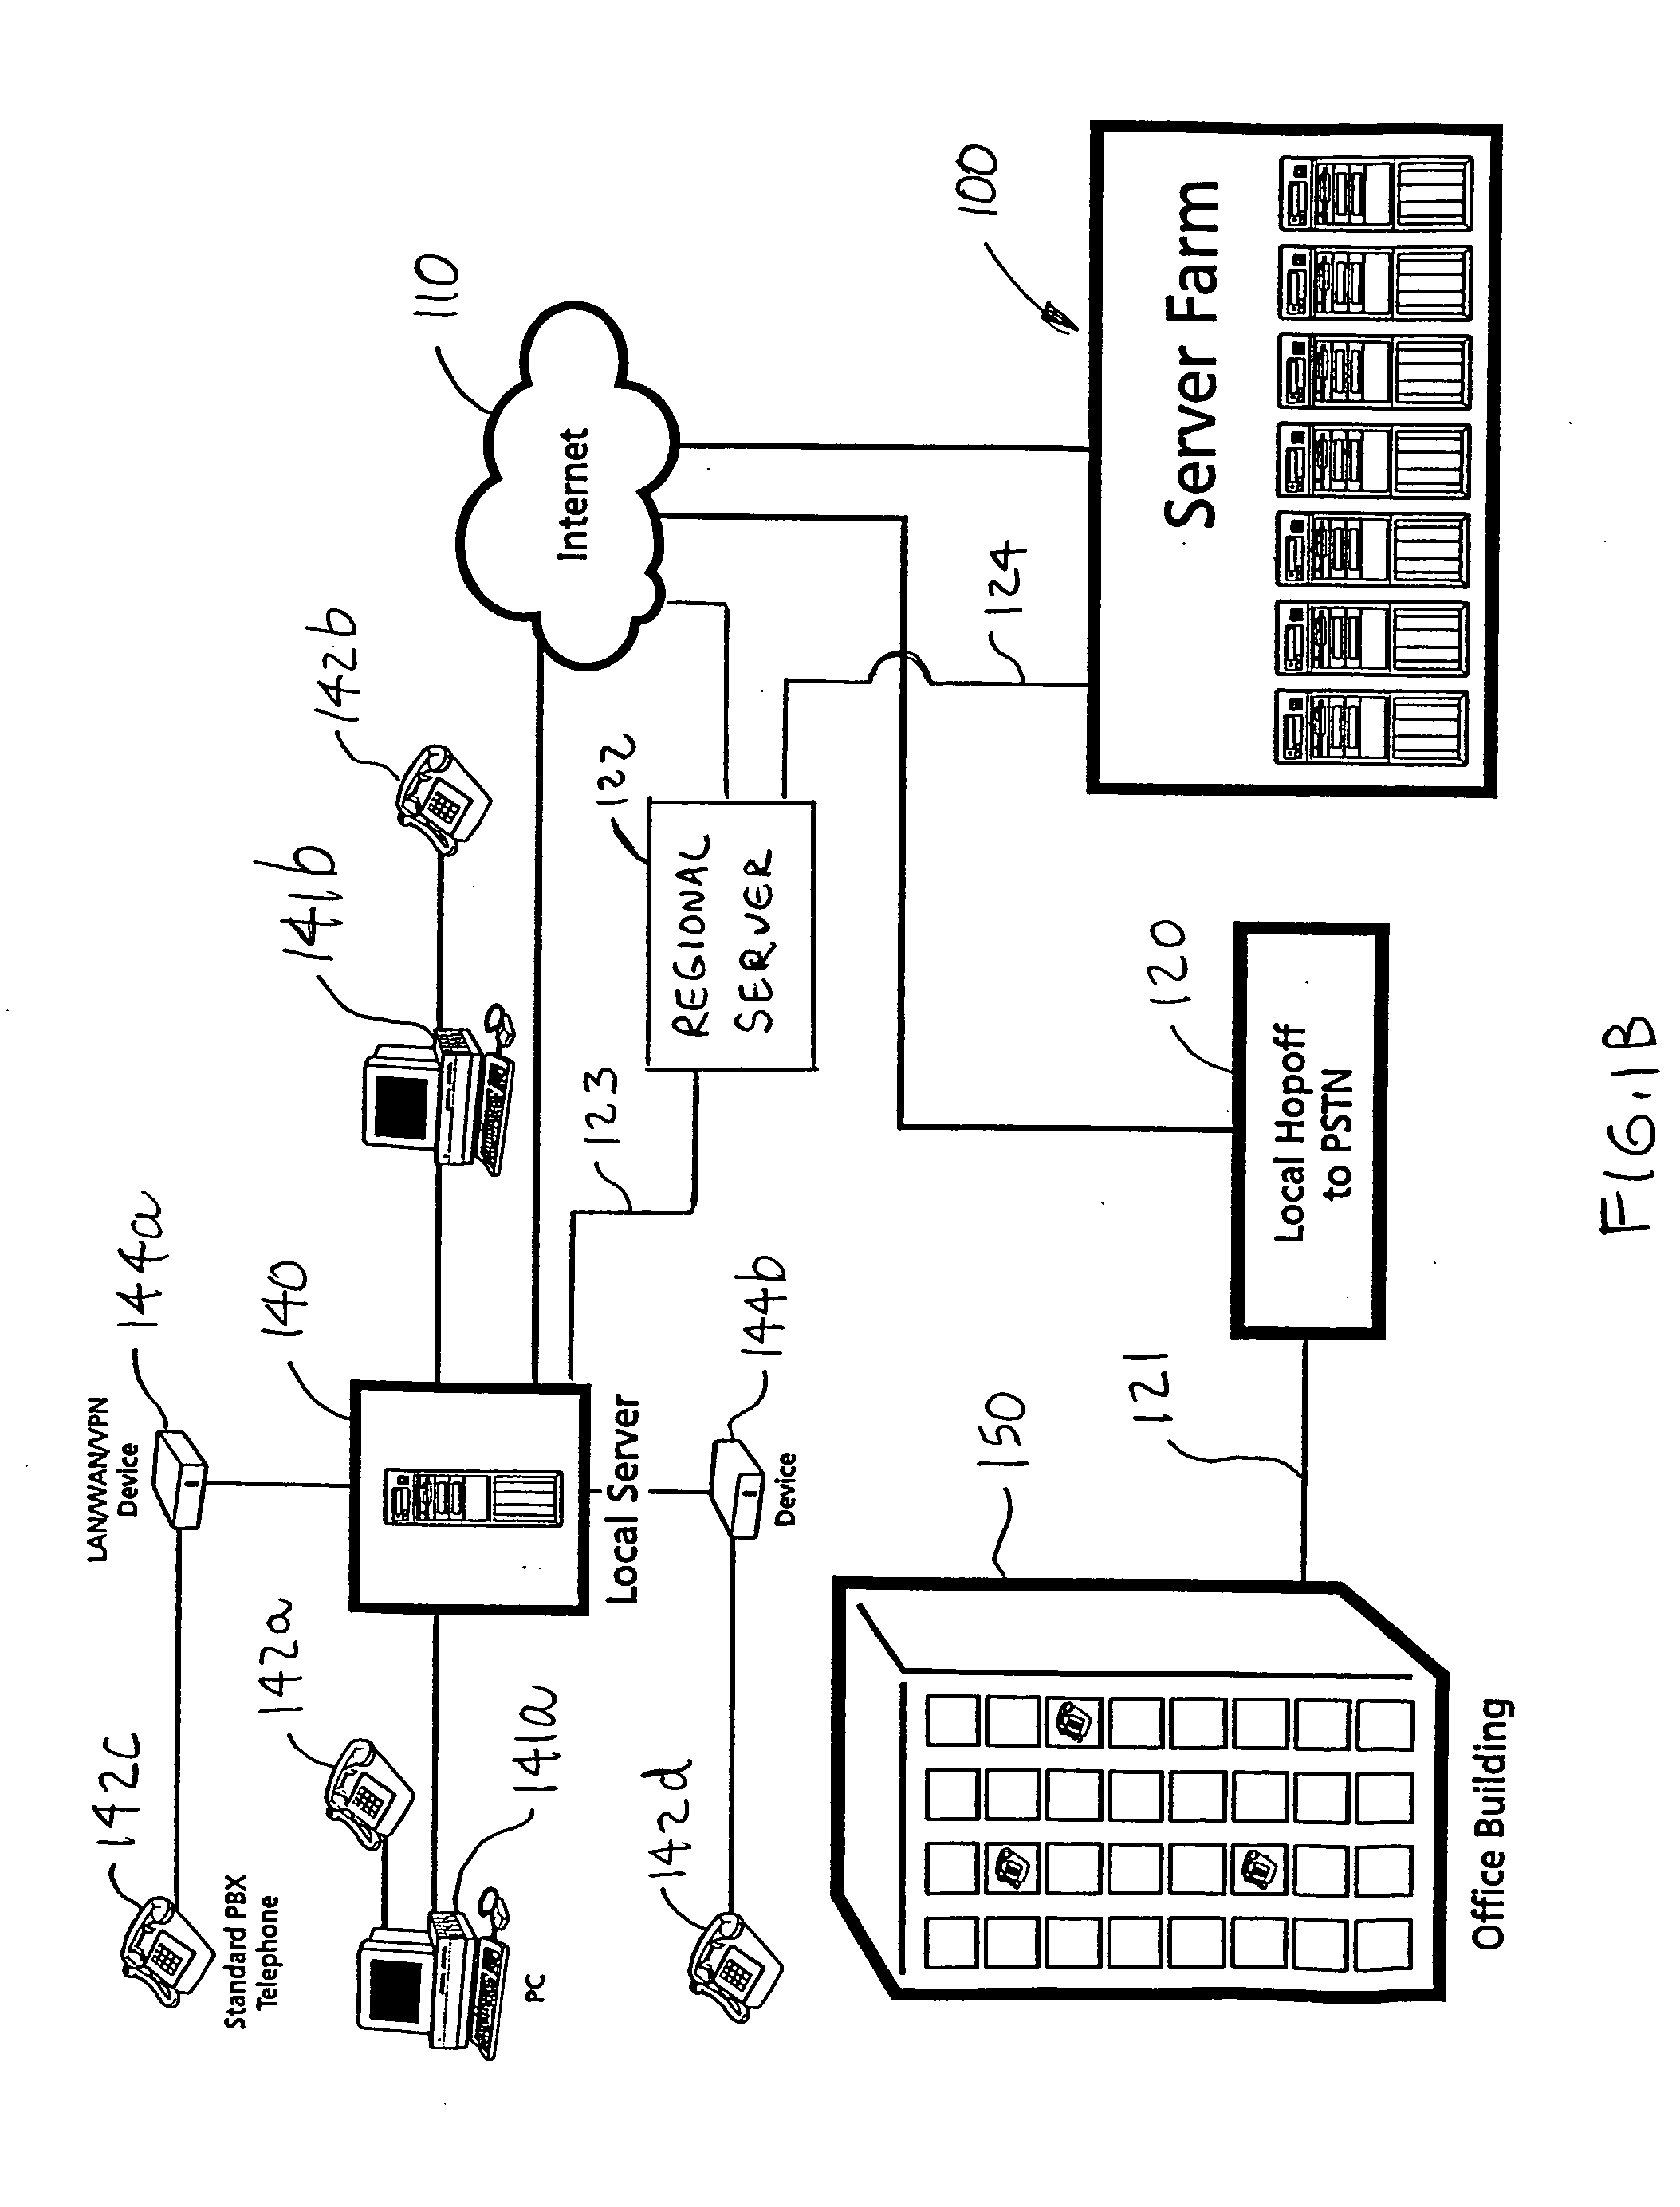 Networked computer system